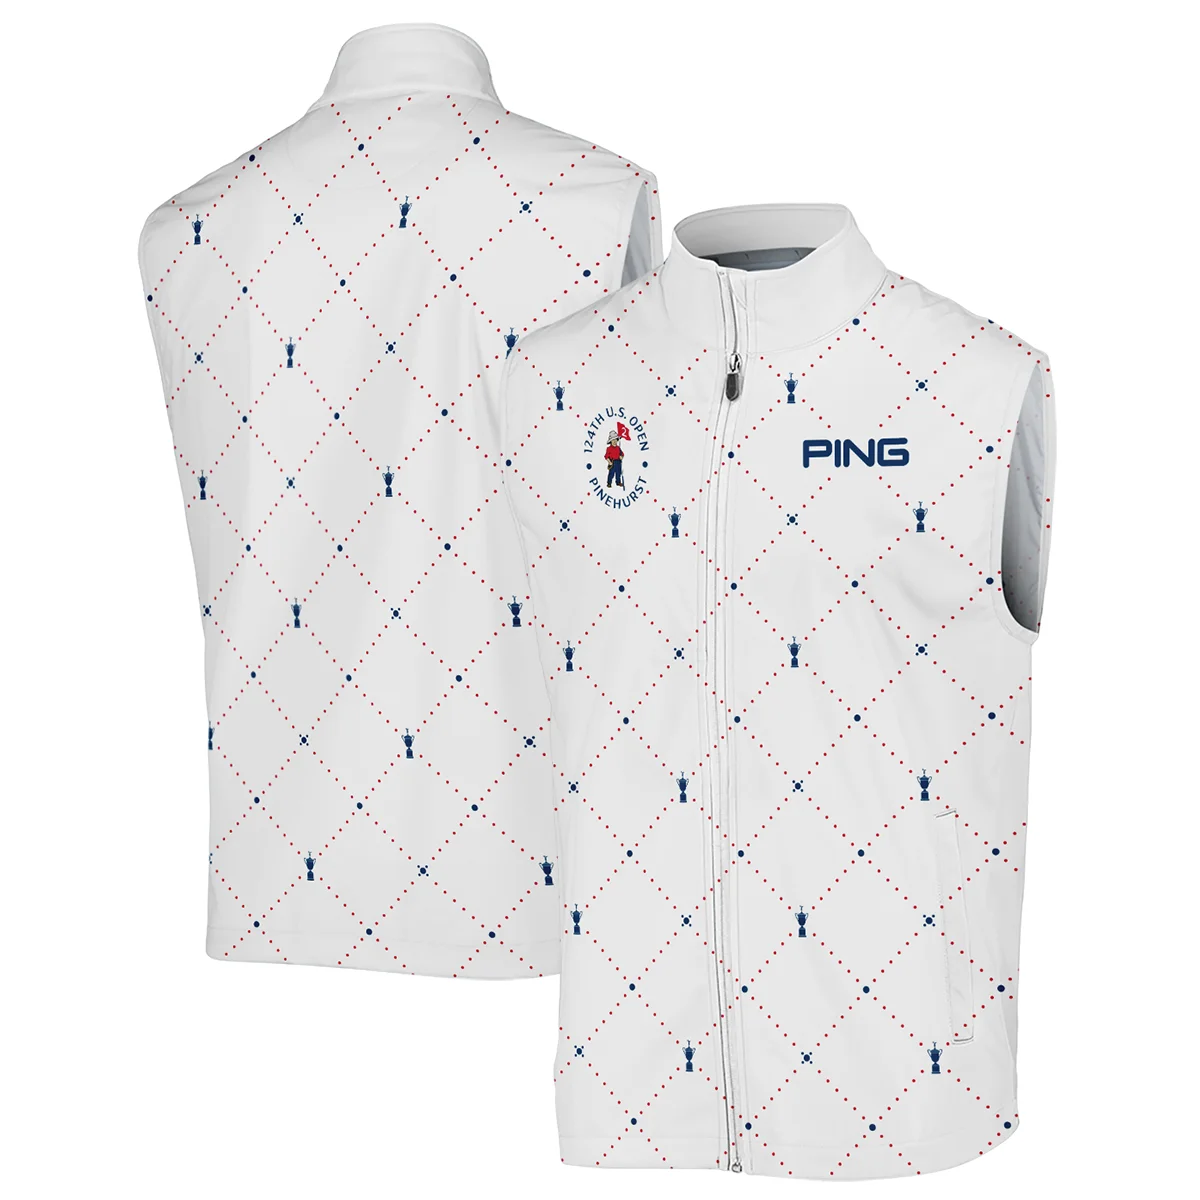 Argyle Pattern With Cup 124th U.S. Open Pinehurst Ping Long Polo Shirt Style Classic Long Polo Shirt For Men